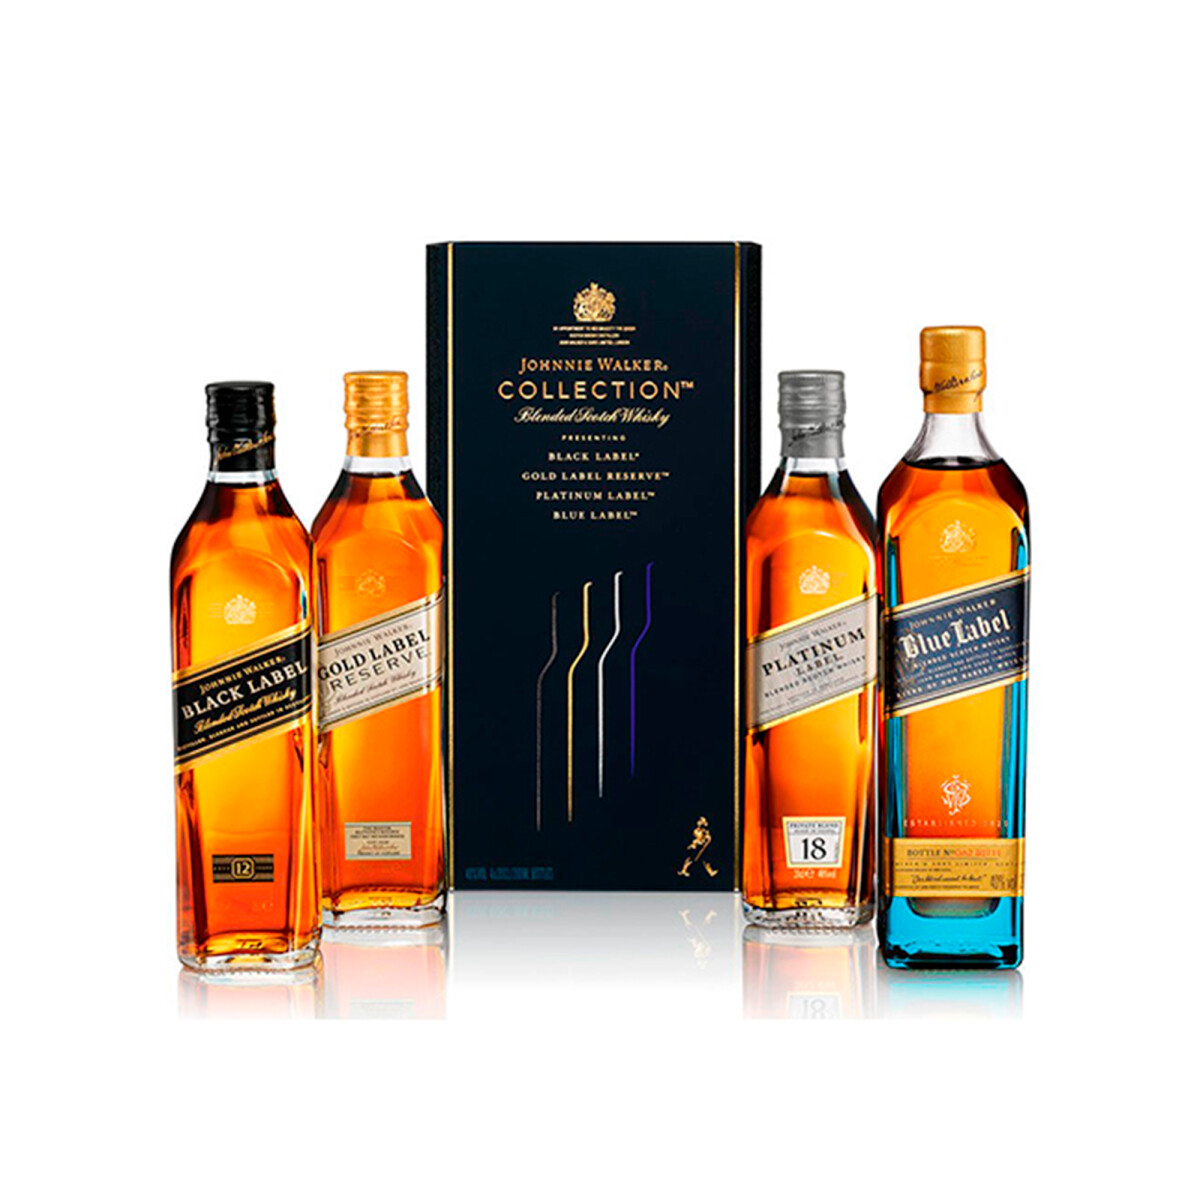 Whisky Johnnie Walker Collection 4 unidades - 200 ml 